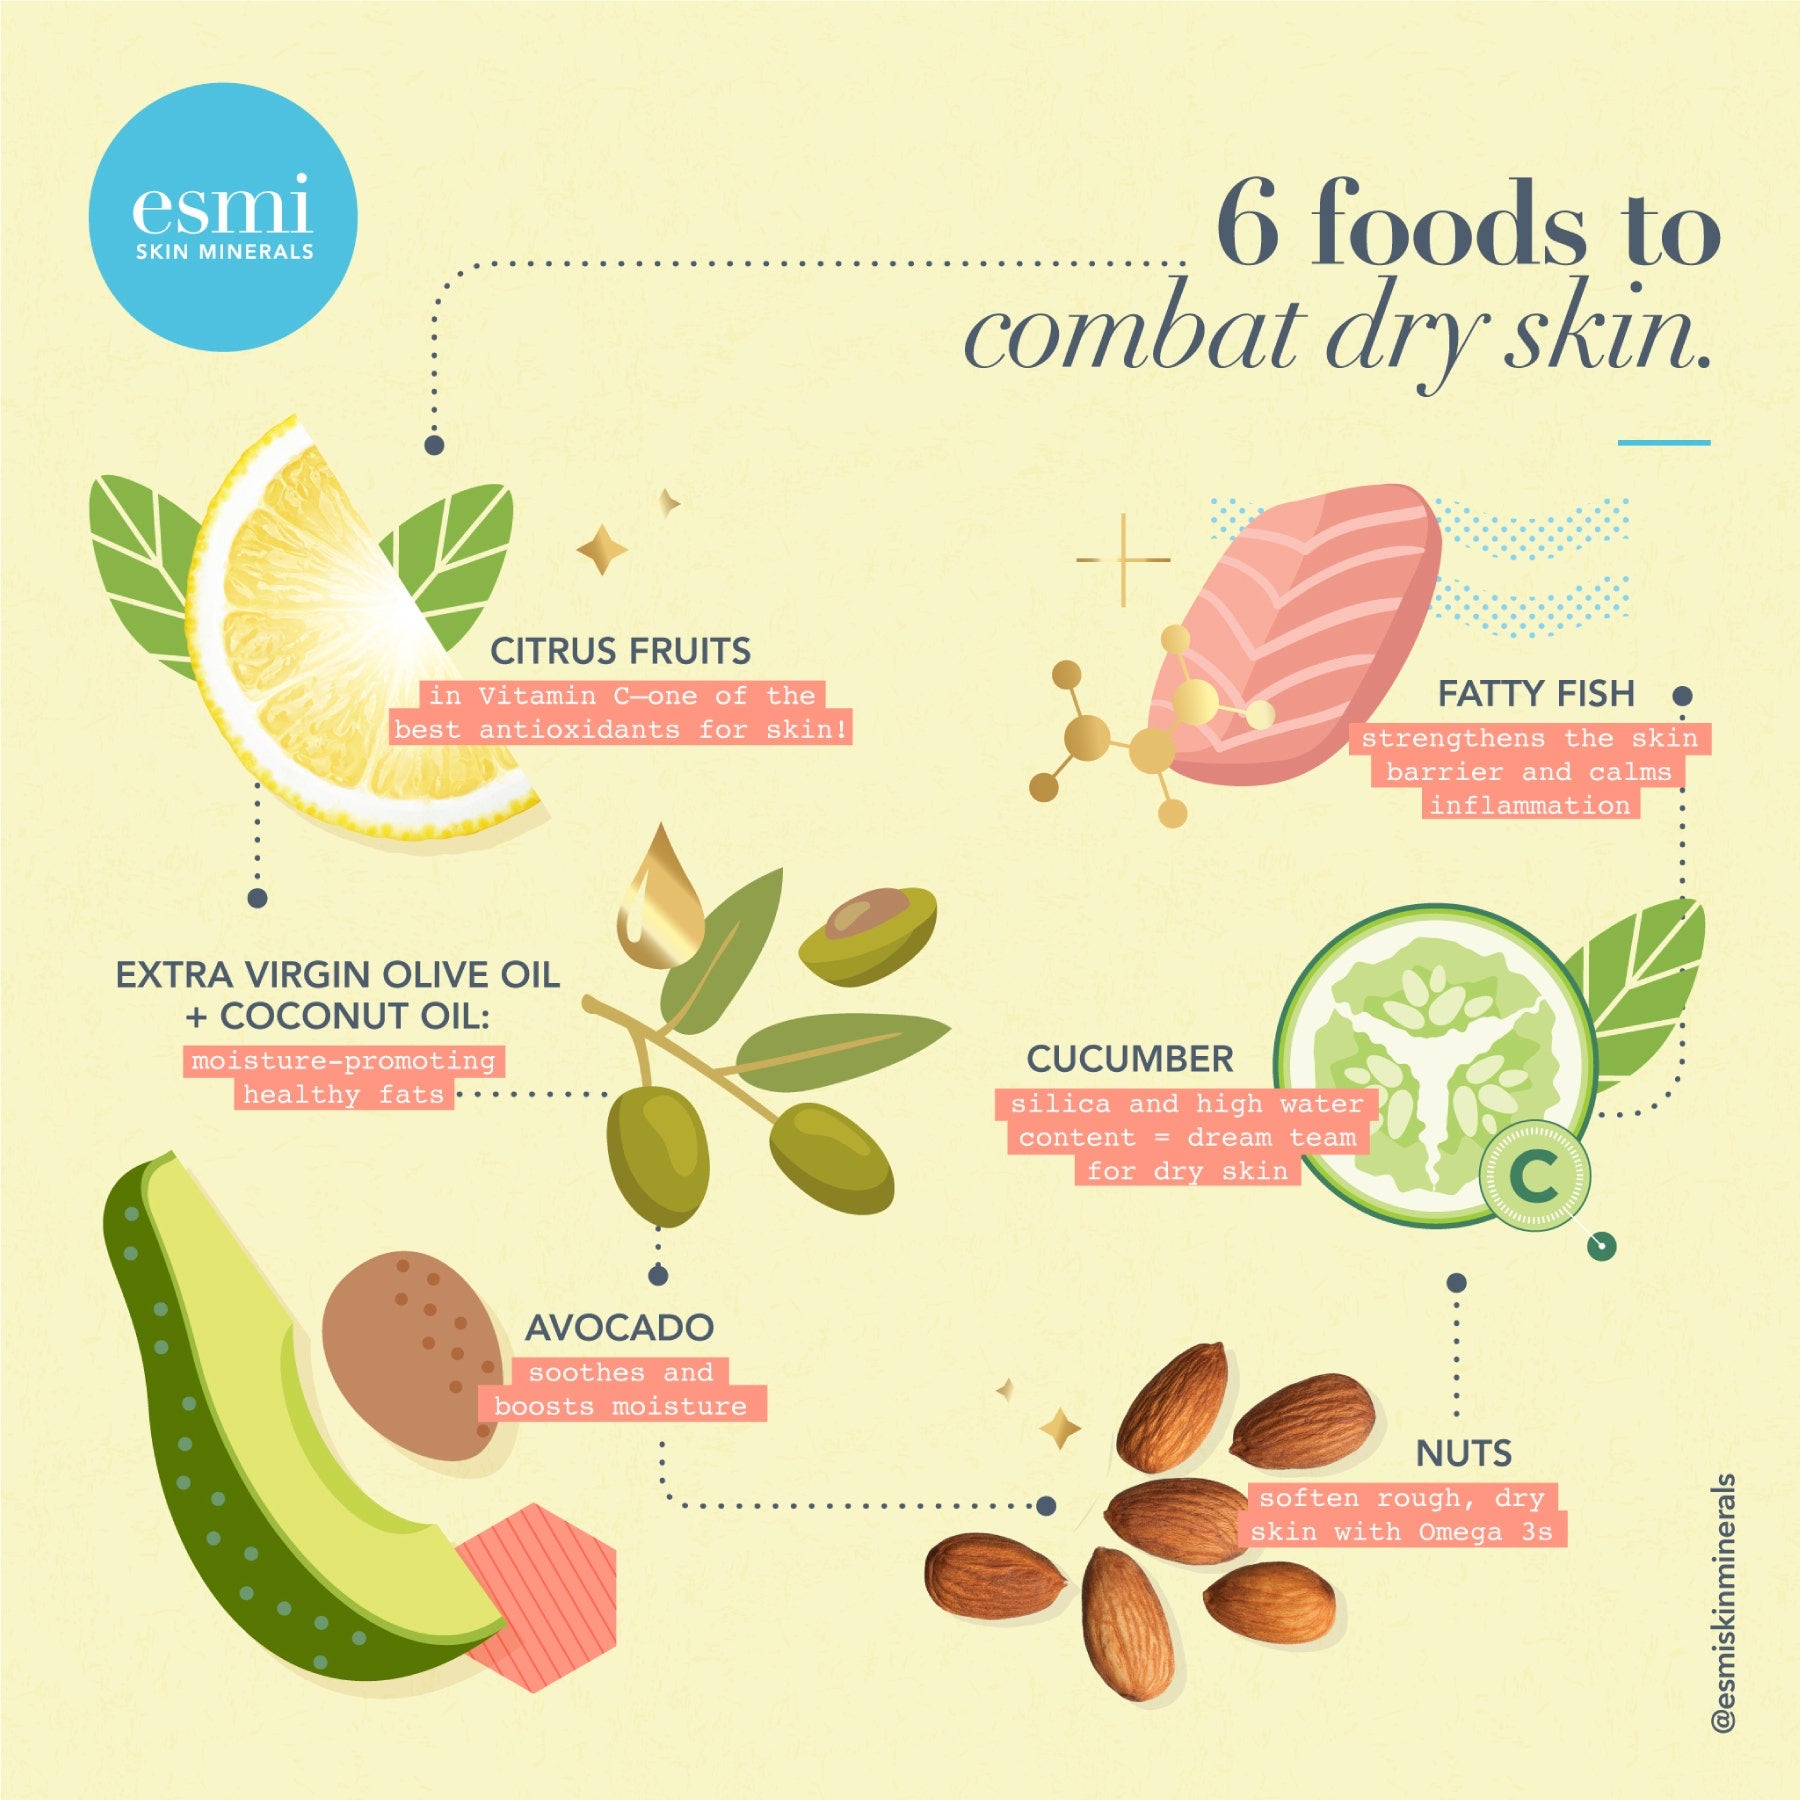 6 Foods to Combay Dry Skin